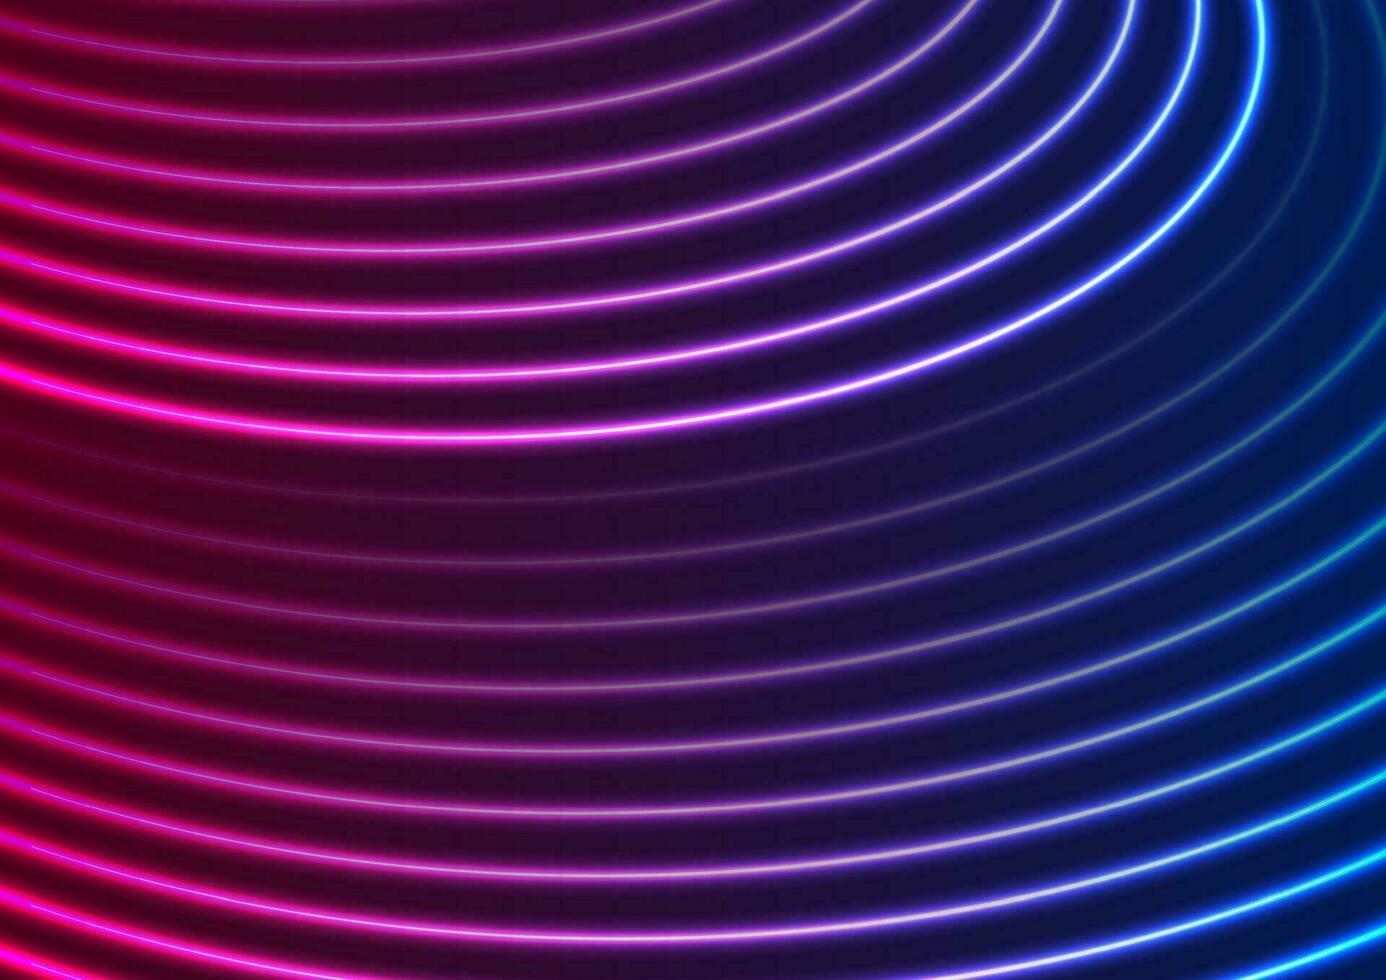 Bright blue purple neon wavy lines abstract background vector